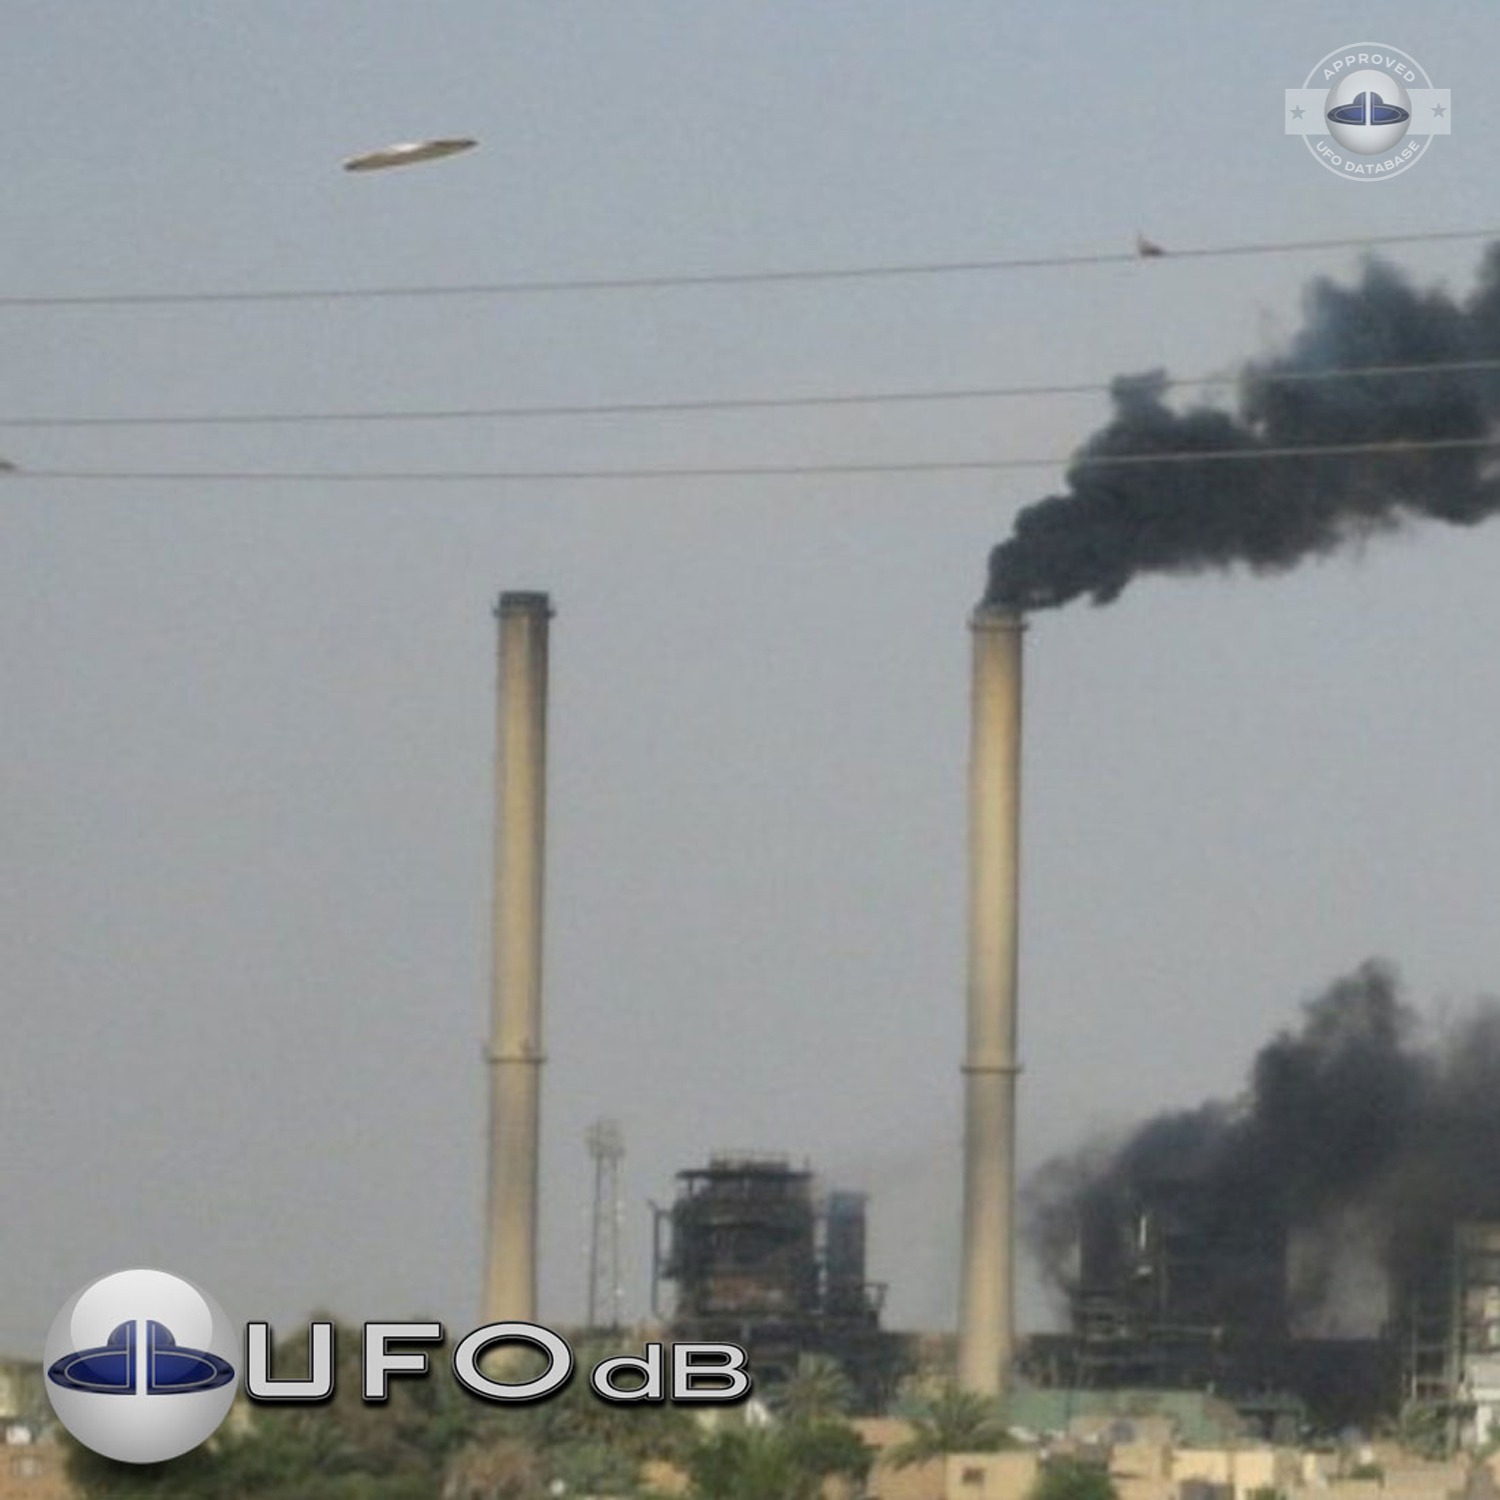 The flying saucer is flying over an industrial factory in Baghdad UFO Picture #58-2